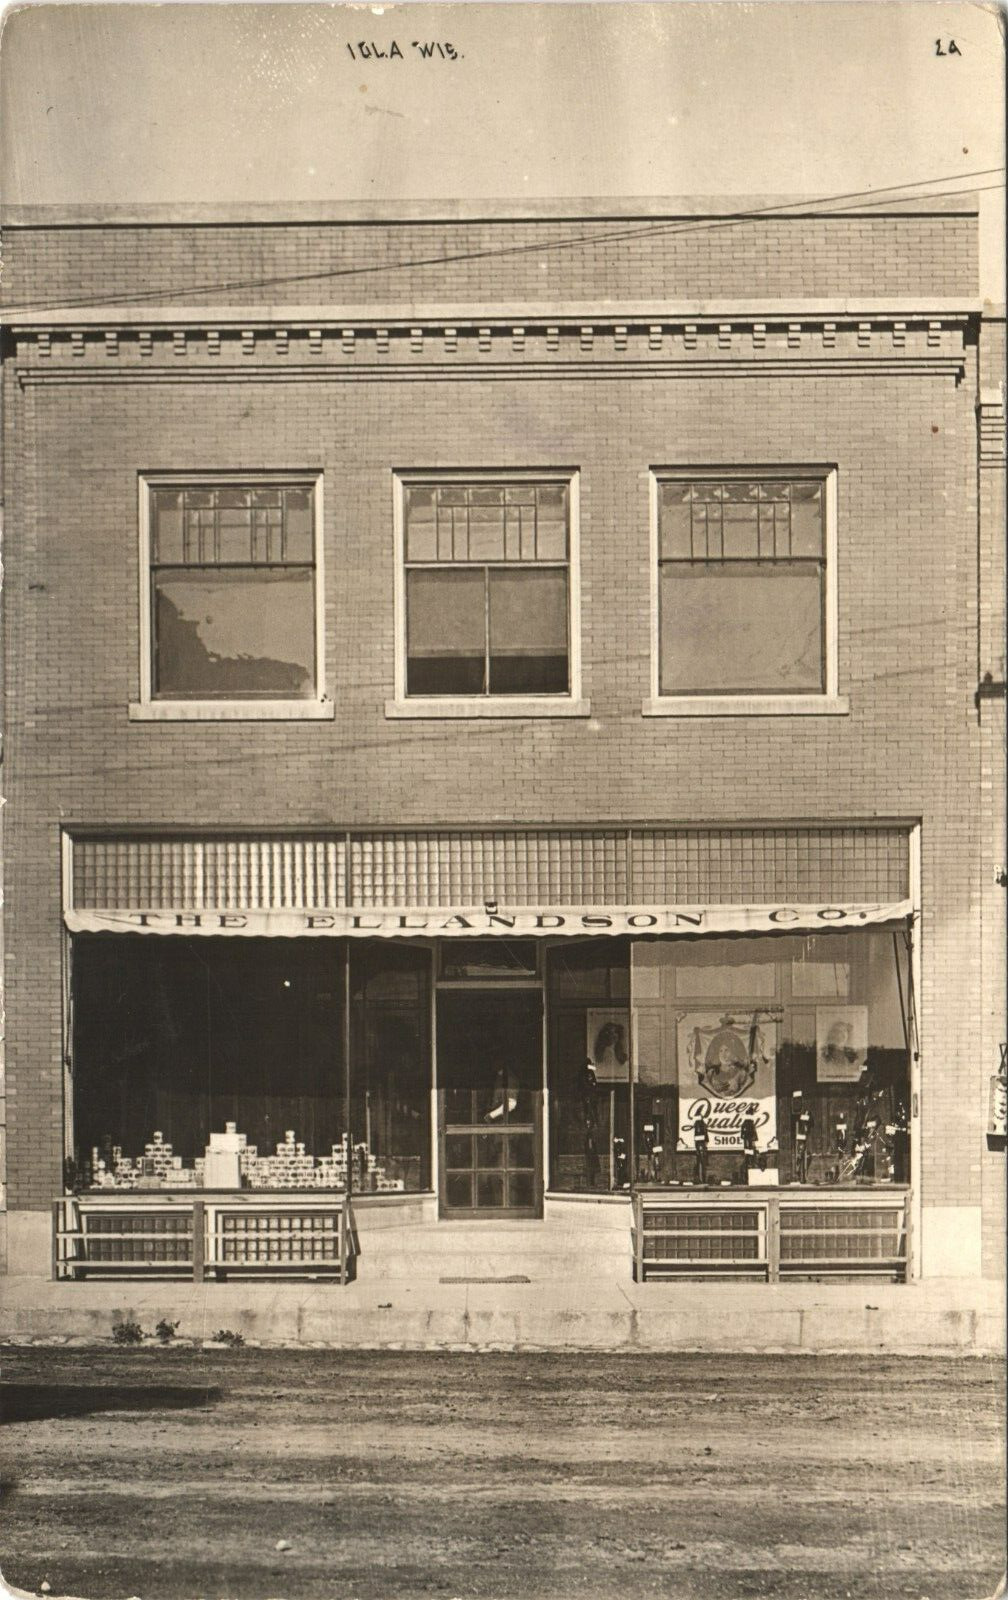 STORE FRONT original real photo postcard rppc IOLA WISCONSIN WI c1910 shoes